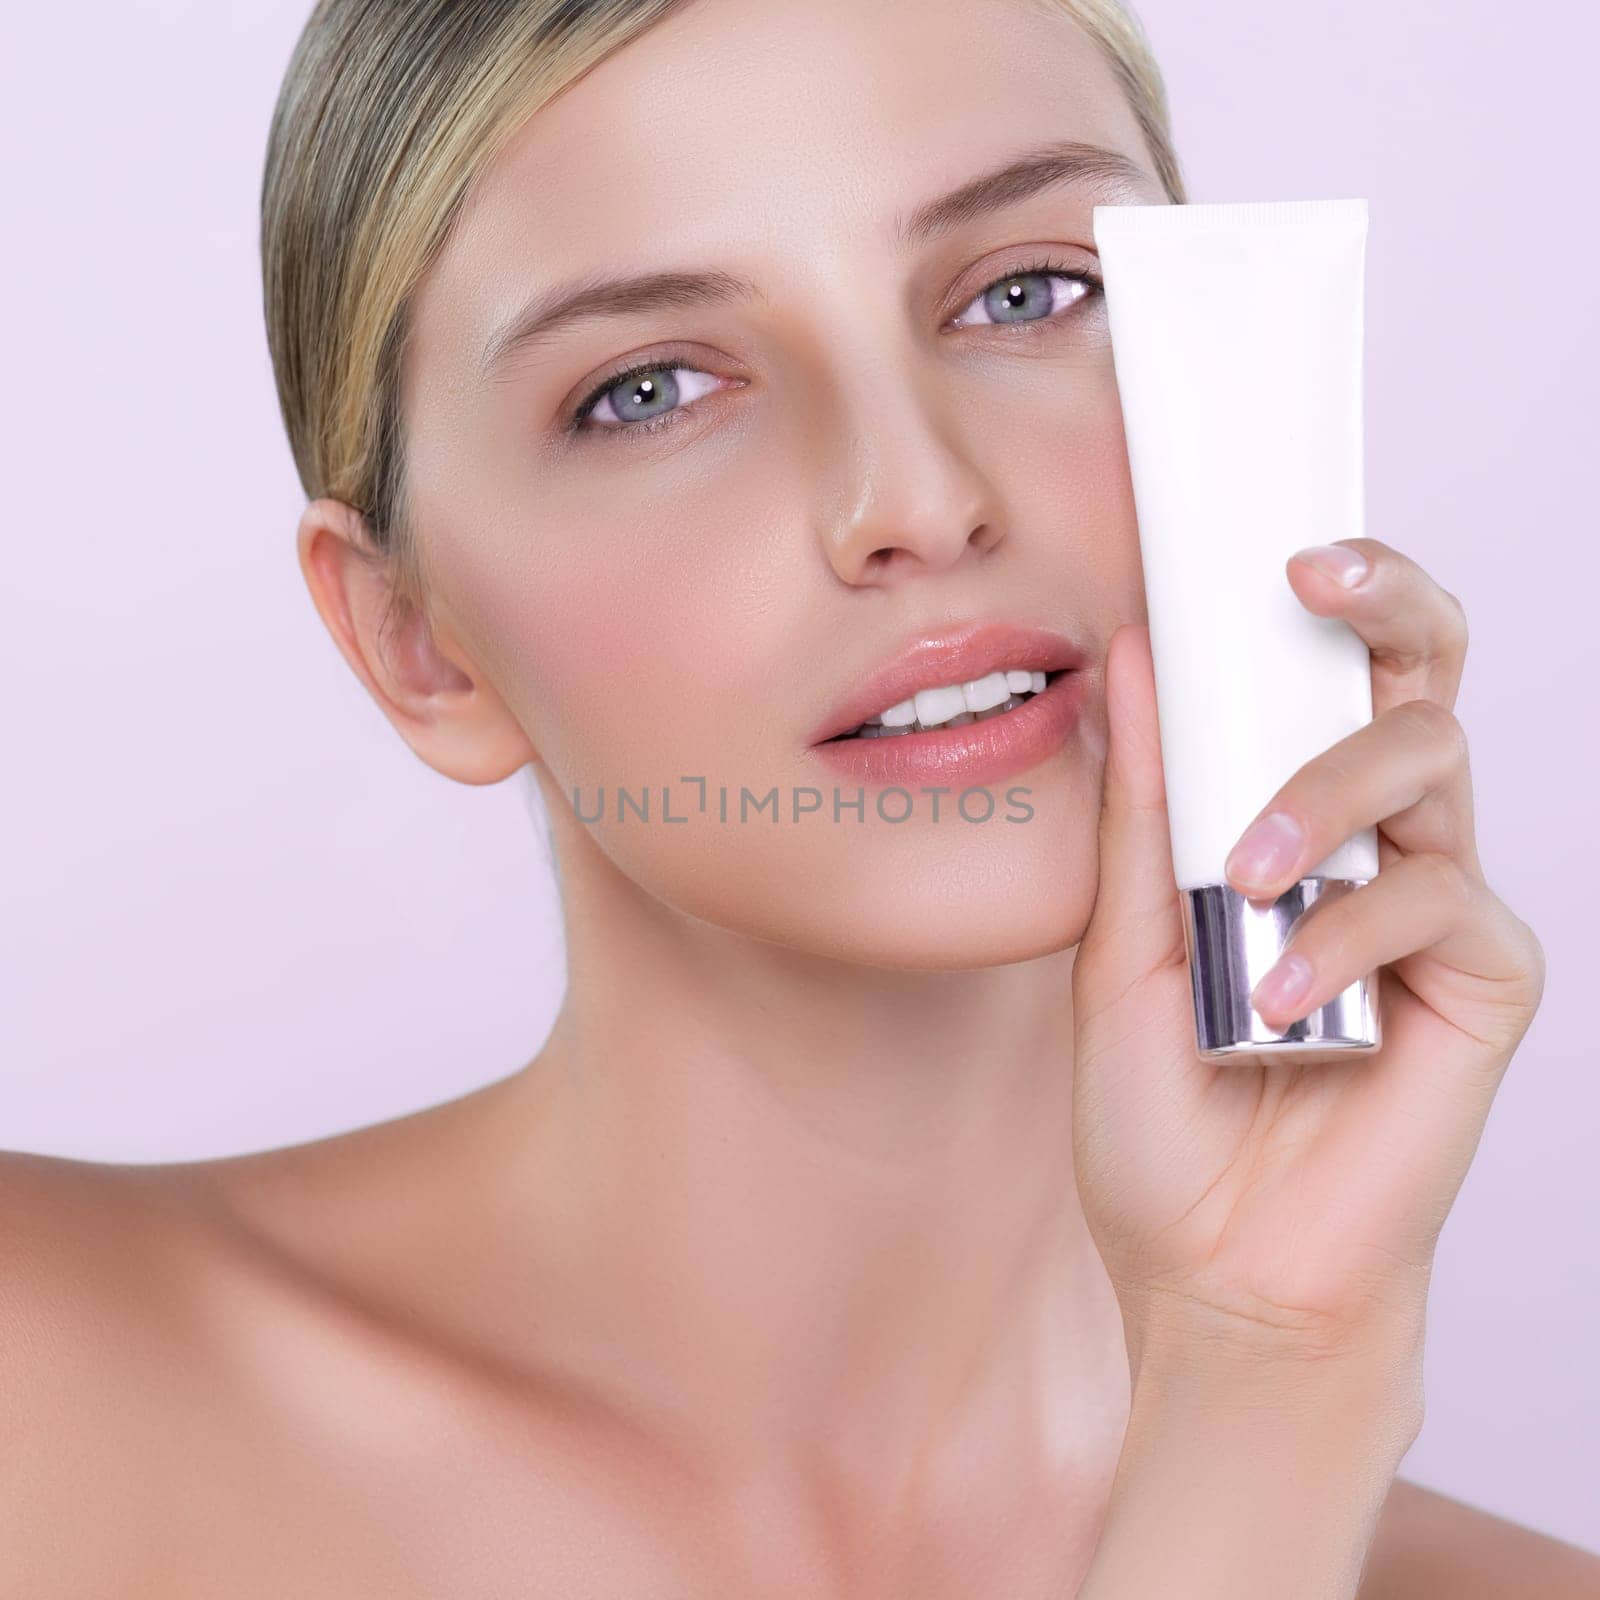 Alluring beautiful perfect cosmetic skin woman portrait hold mockup tube cream or moisturizer for skincare treatment, anti-aging product in isolated background. Natural healthy skin model concept.